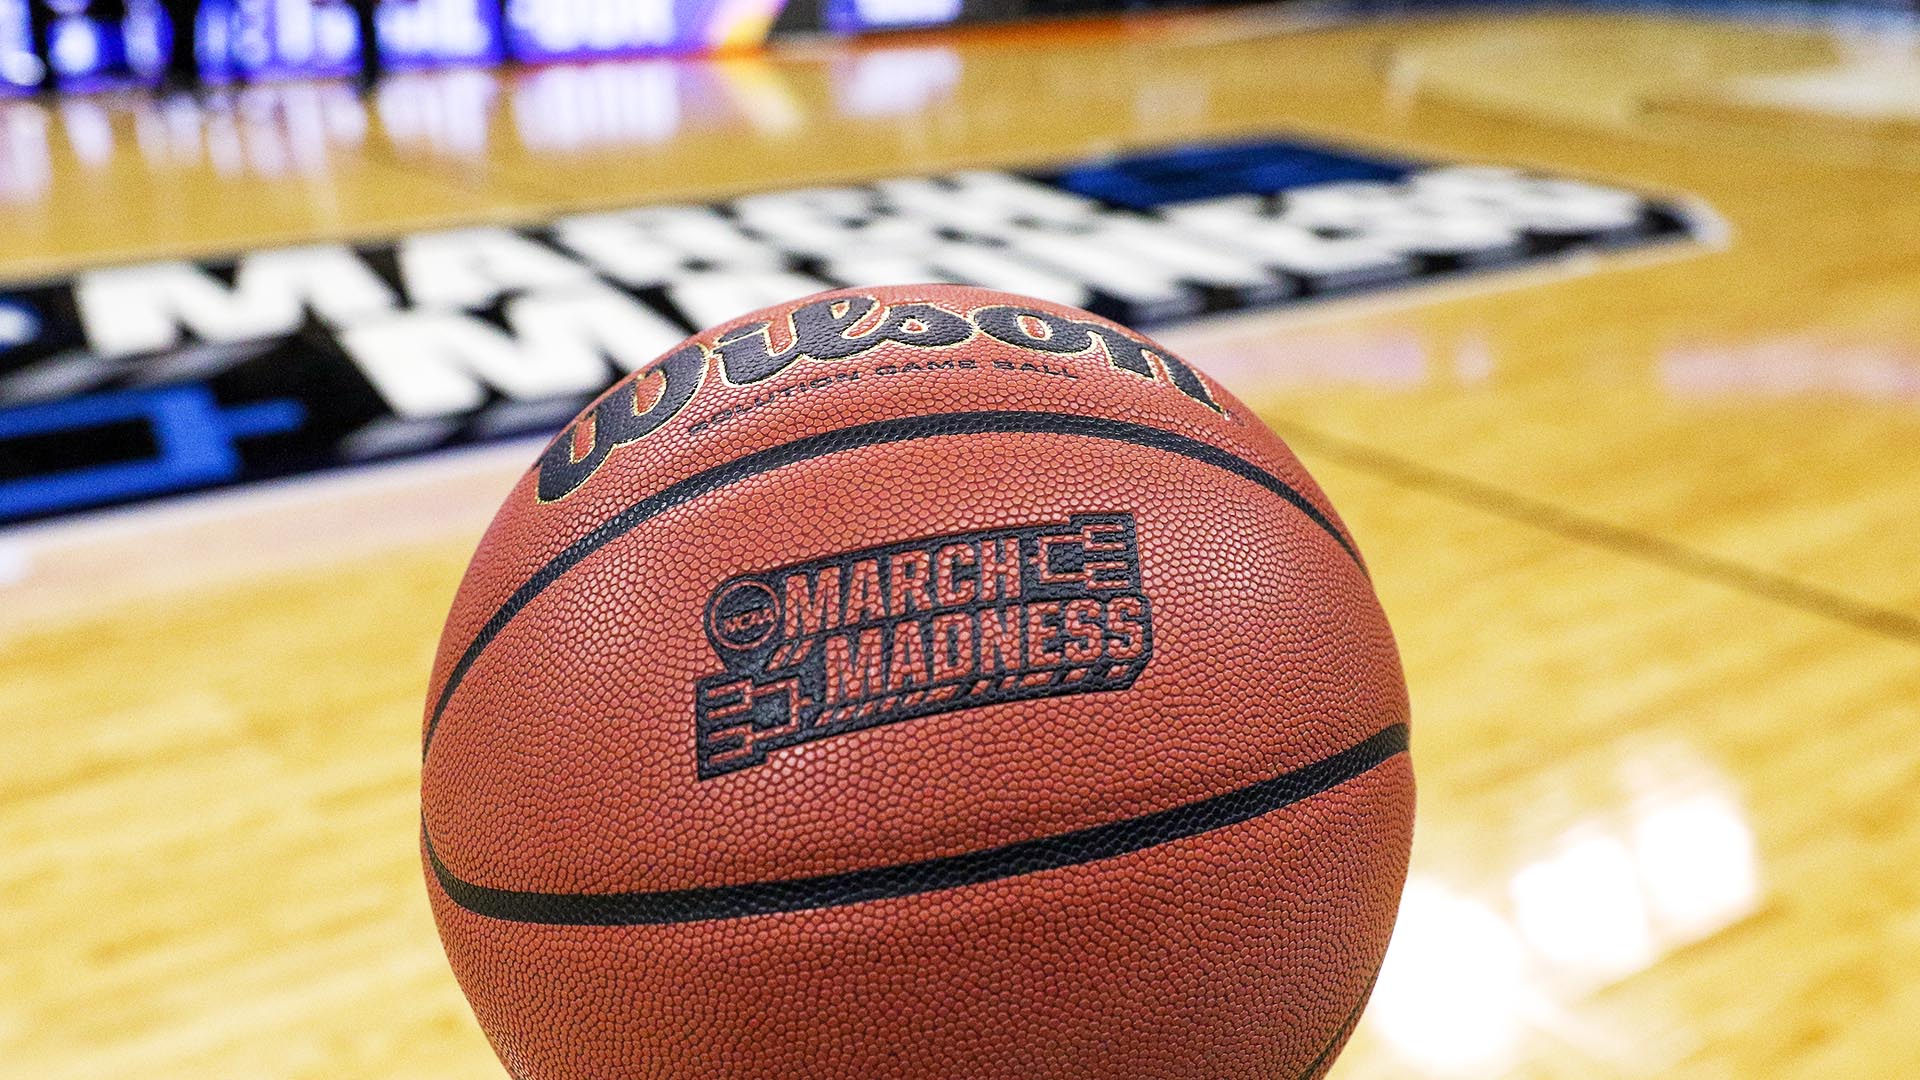 The novice’s guide to a successful March Madness